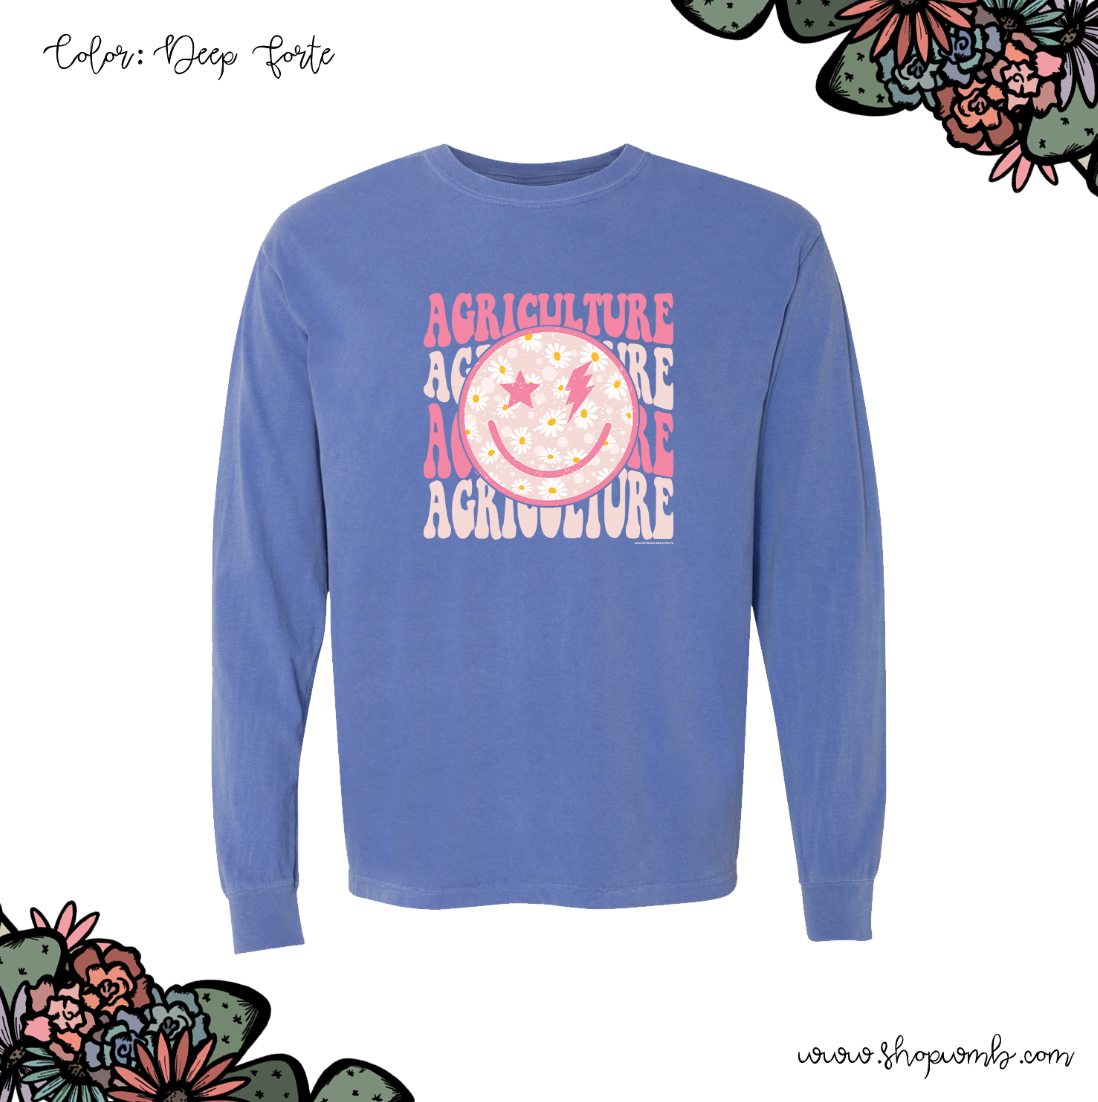 Groovy Smile Agriculture LONG SLEEVE T-Shirt (S-3XL) - Multiple Colors!